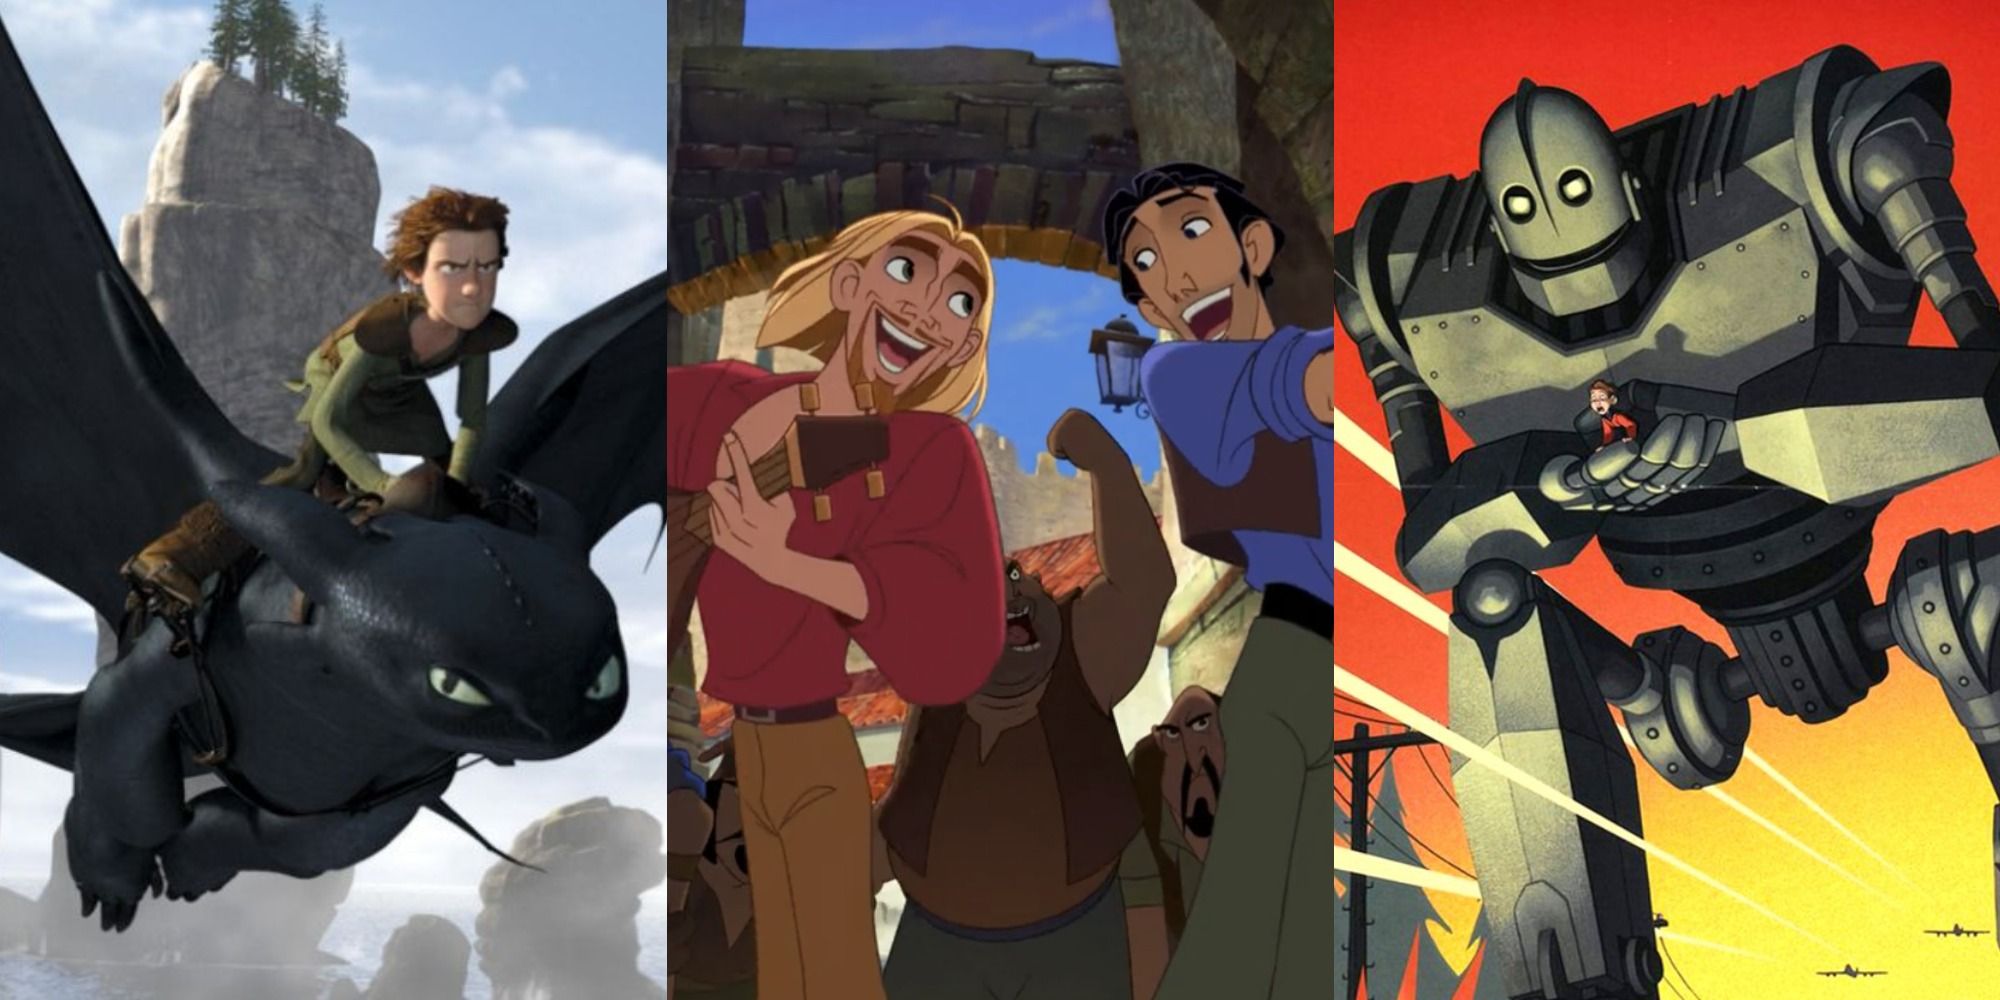 Are any Disney live action movies better than the animated original? - Quora